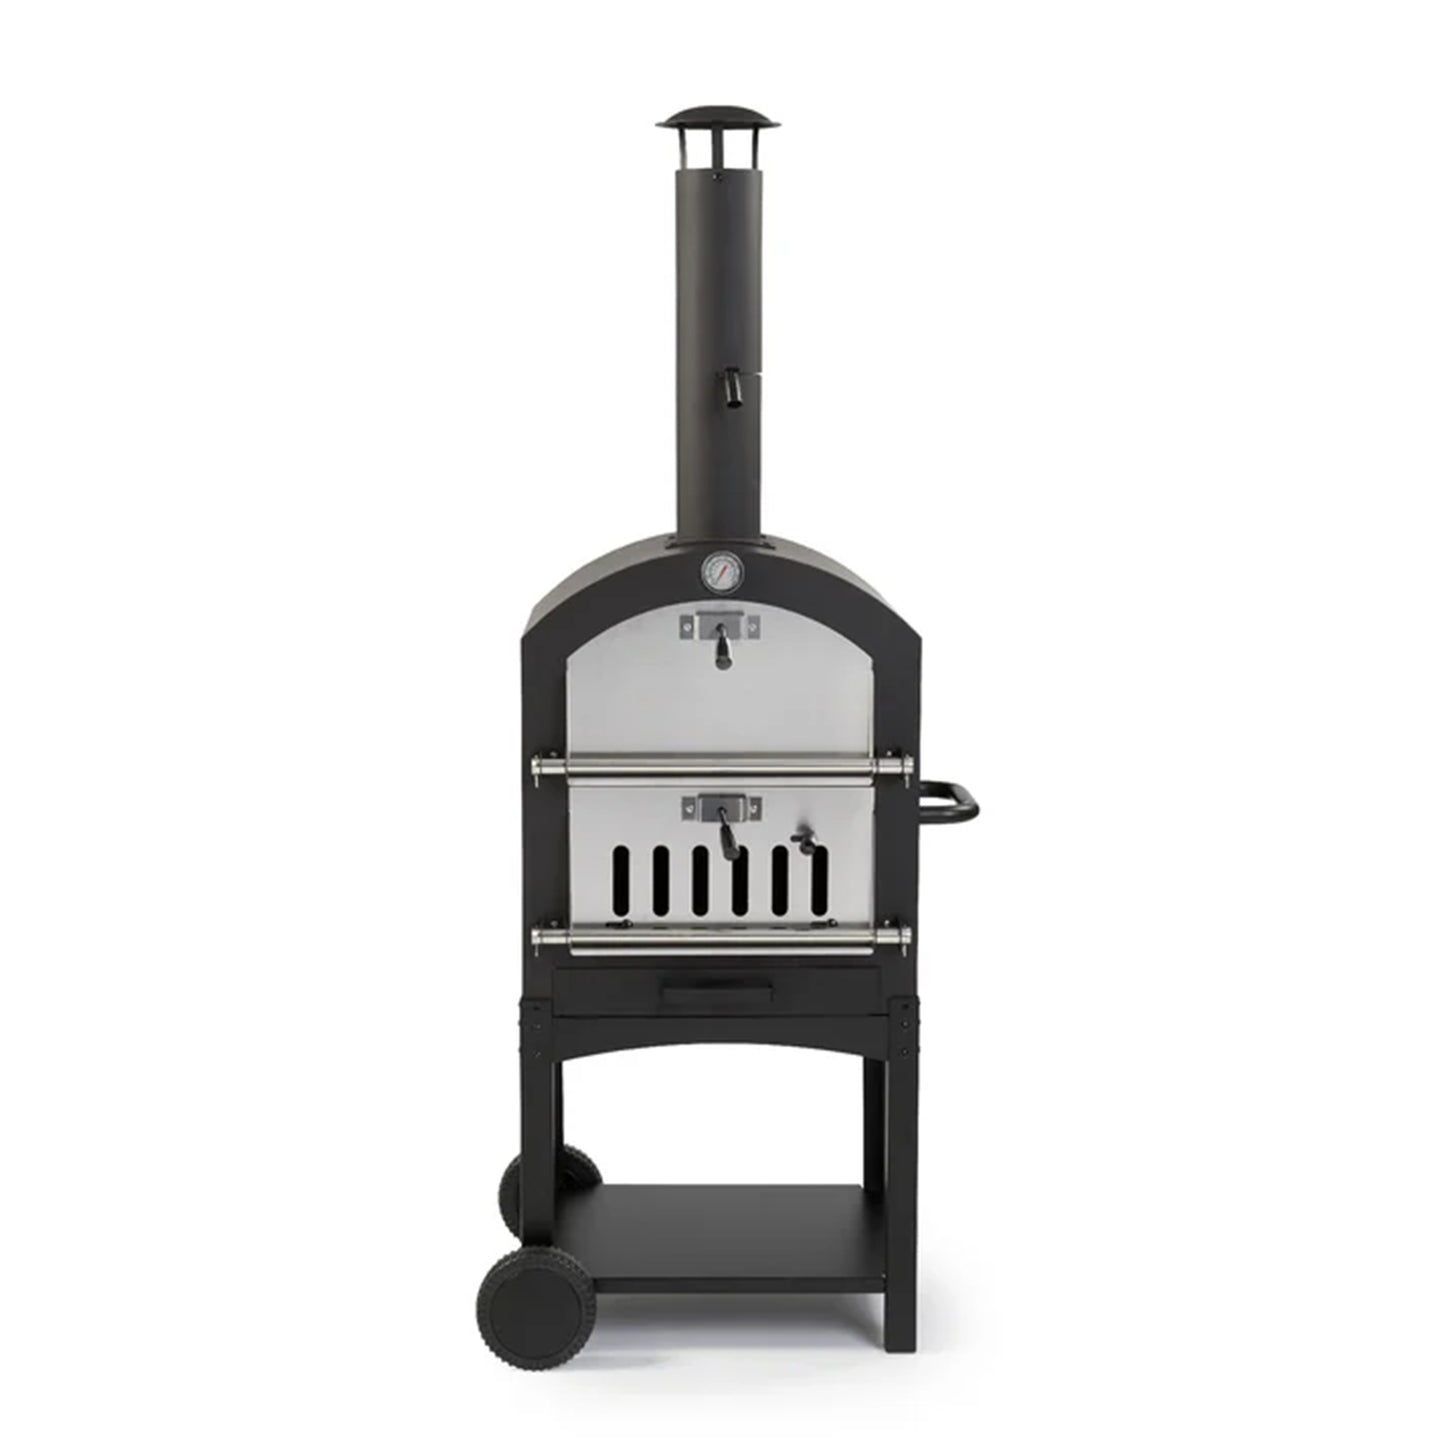 WPPO, LLC Stand Alone Eco Wood Fired Garden Oven with Pizza Stone.